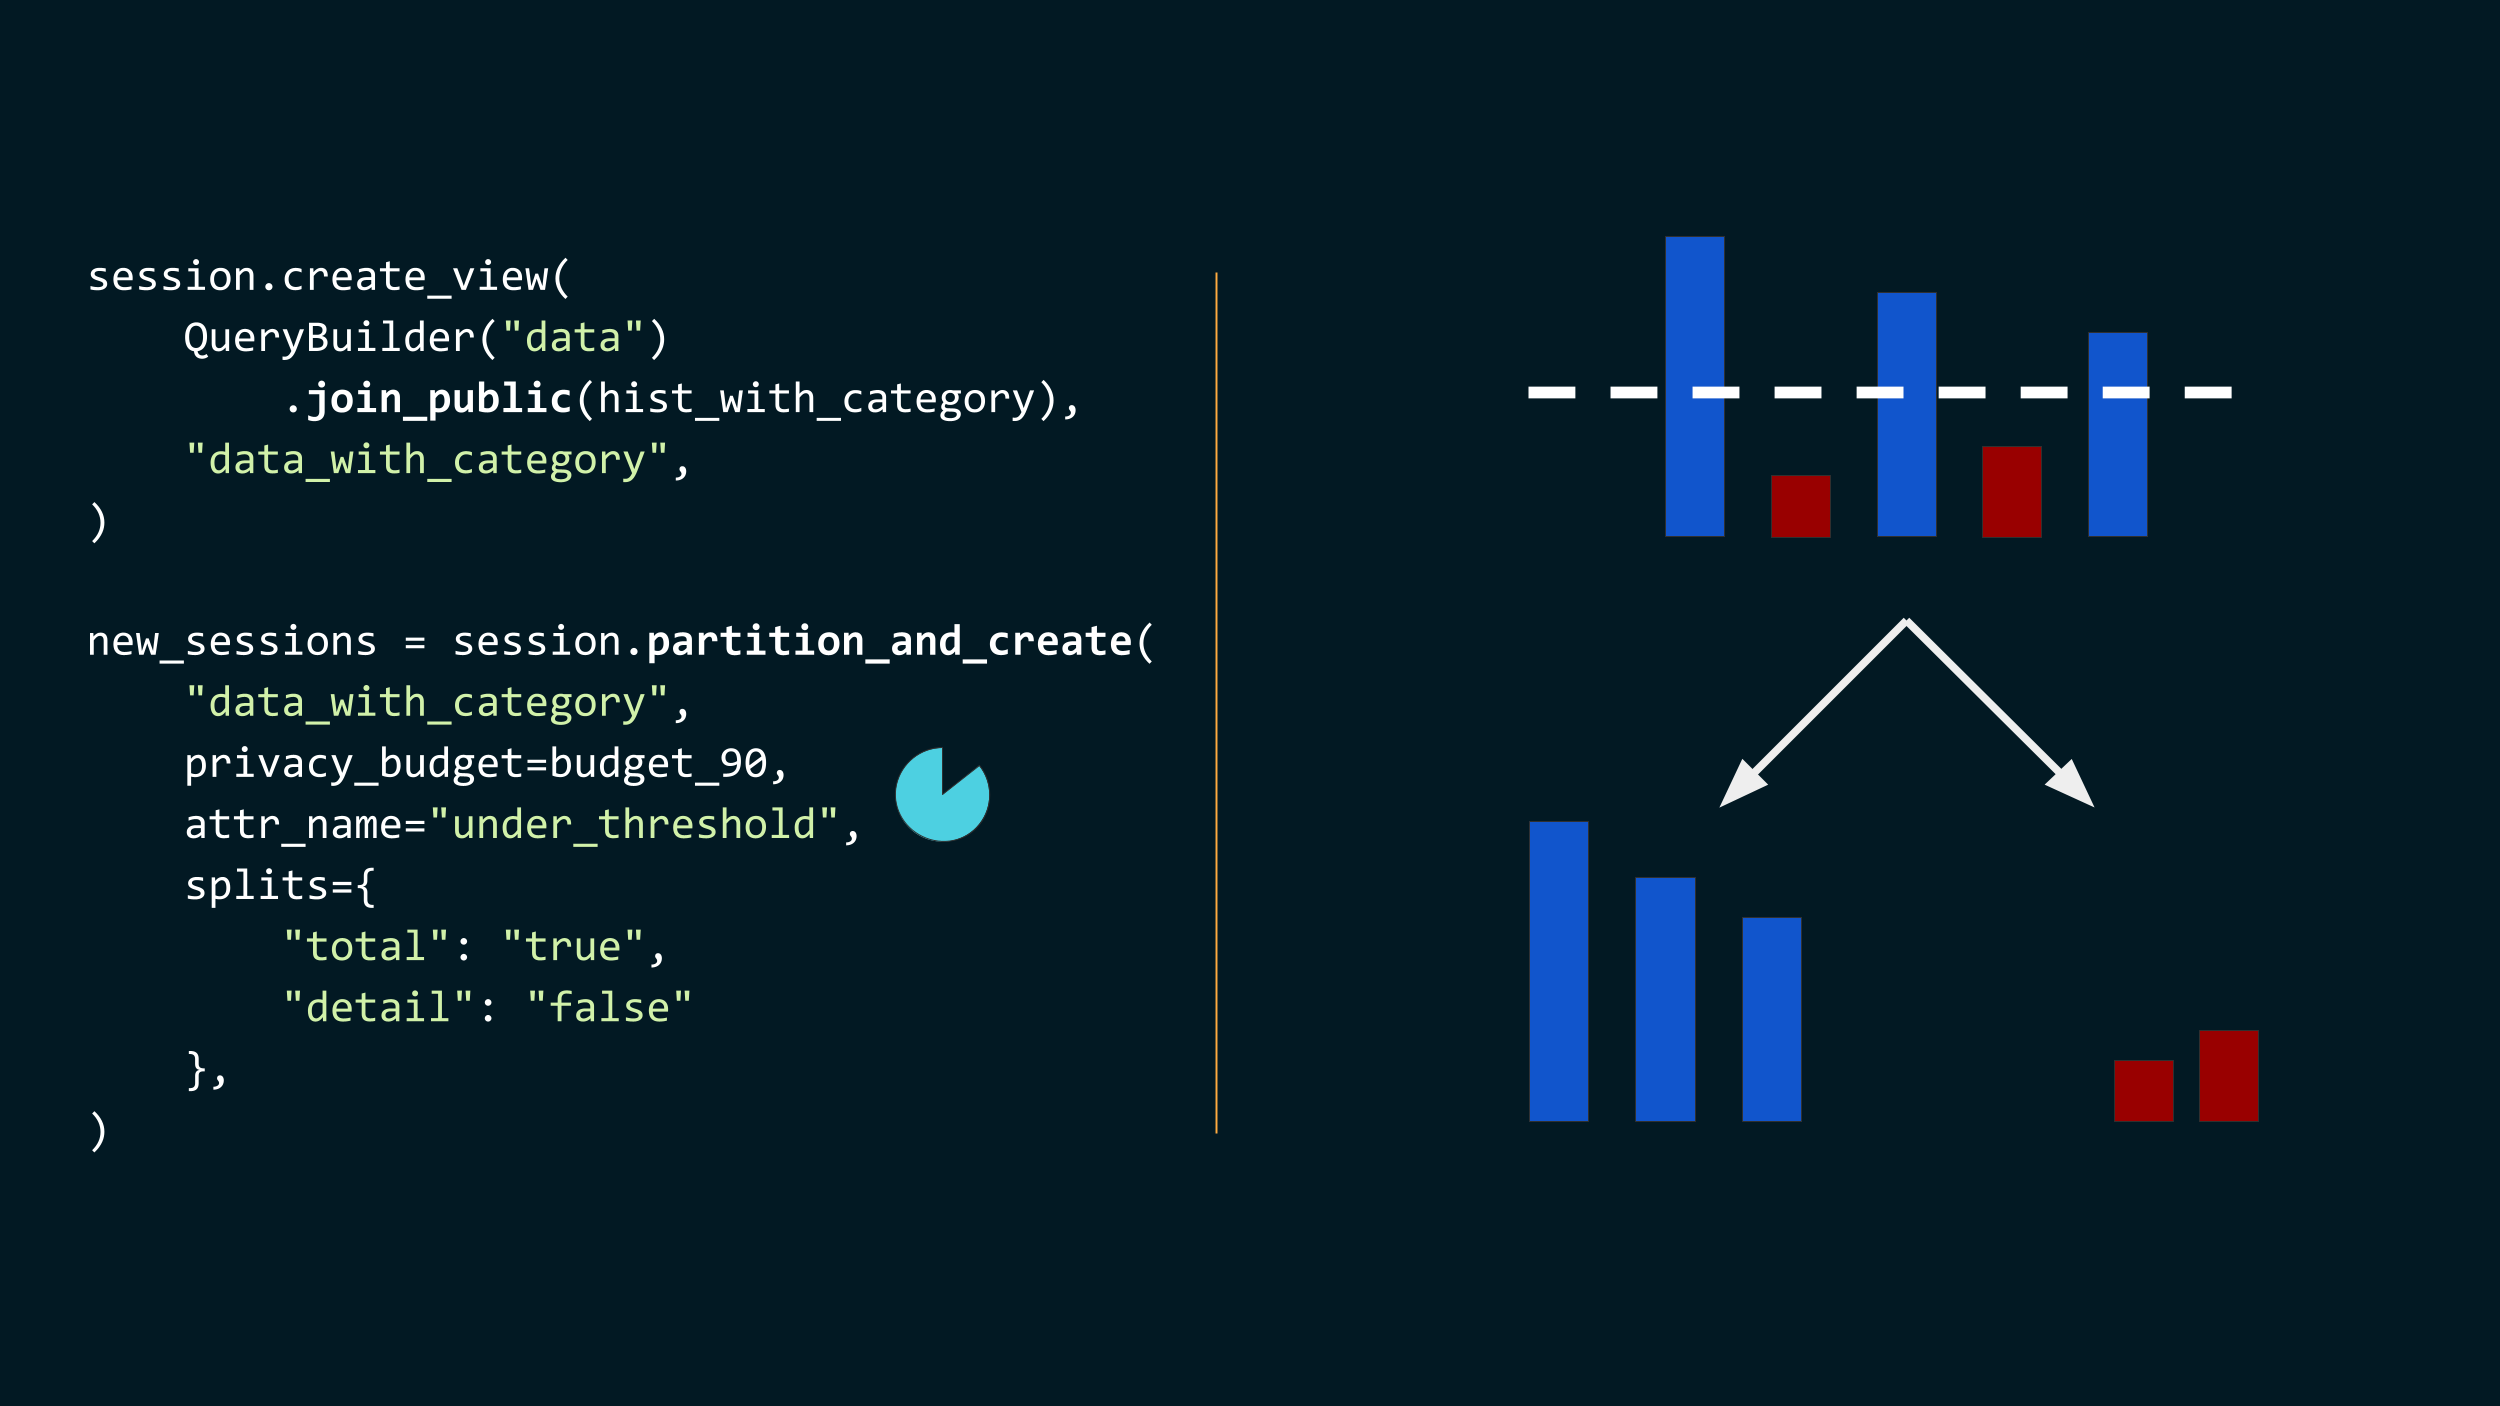 Two code snippets with accompanying visuals. //
session.create_view(
    QueryBuilder("data")
        .join_public(hist_with_category),
    "data_with_category",
)
This is represented by the same histogram split in two as earlier. //
budget_10 = RhoZCDP(total_budget / 10.)
budget_90 = RhoZCDP(total_budget * 9./10.)
This is represented by a pie chart splitting a disc in 1/10 and 9/10.
new_sessions = session.partition_and_create(
    "data_with_category",
    privacy_budget=budget_90,
    attr_name="under_threshold",
    splits={
        "total": "true",
        "detail": "false"
    },
)
This is represented by two arrows leading to two separate histograms, one with
the buckets above the threshold, one with the buckets under the
threshold. This uses the 9/10 part of the privacy budget
pie.